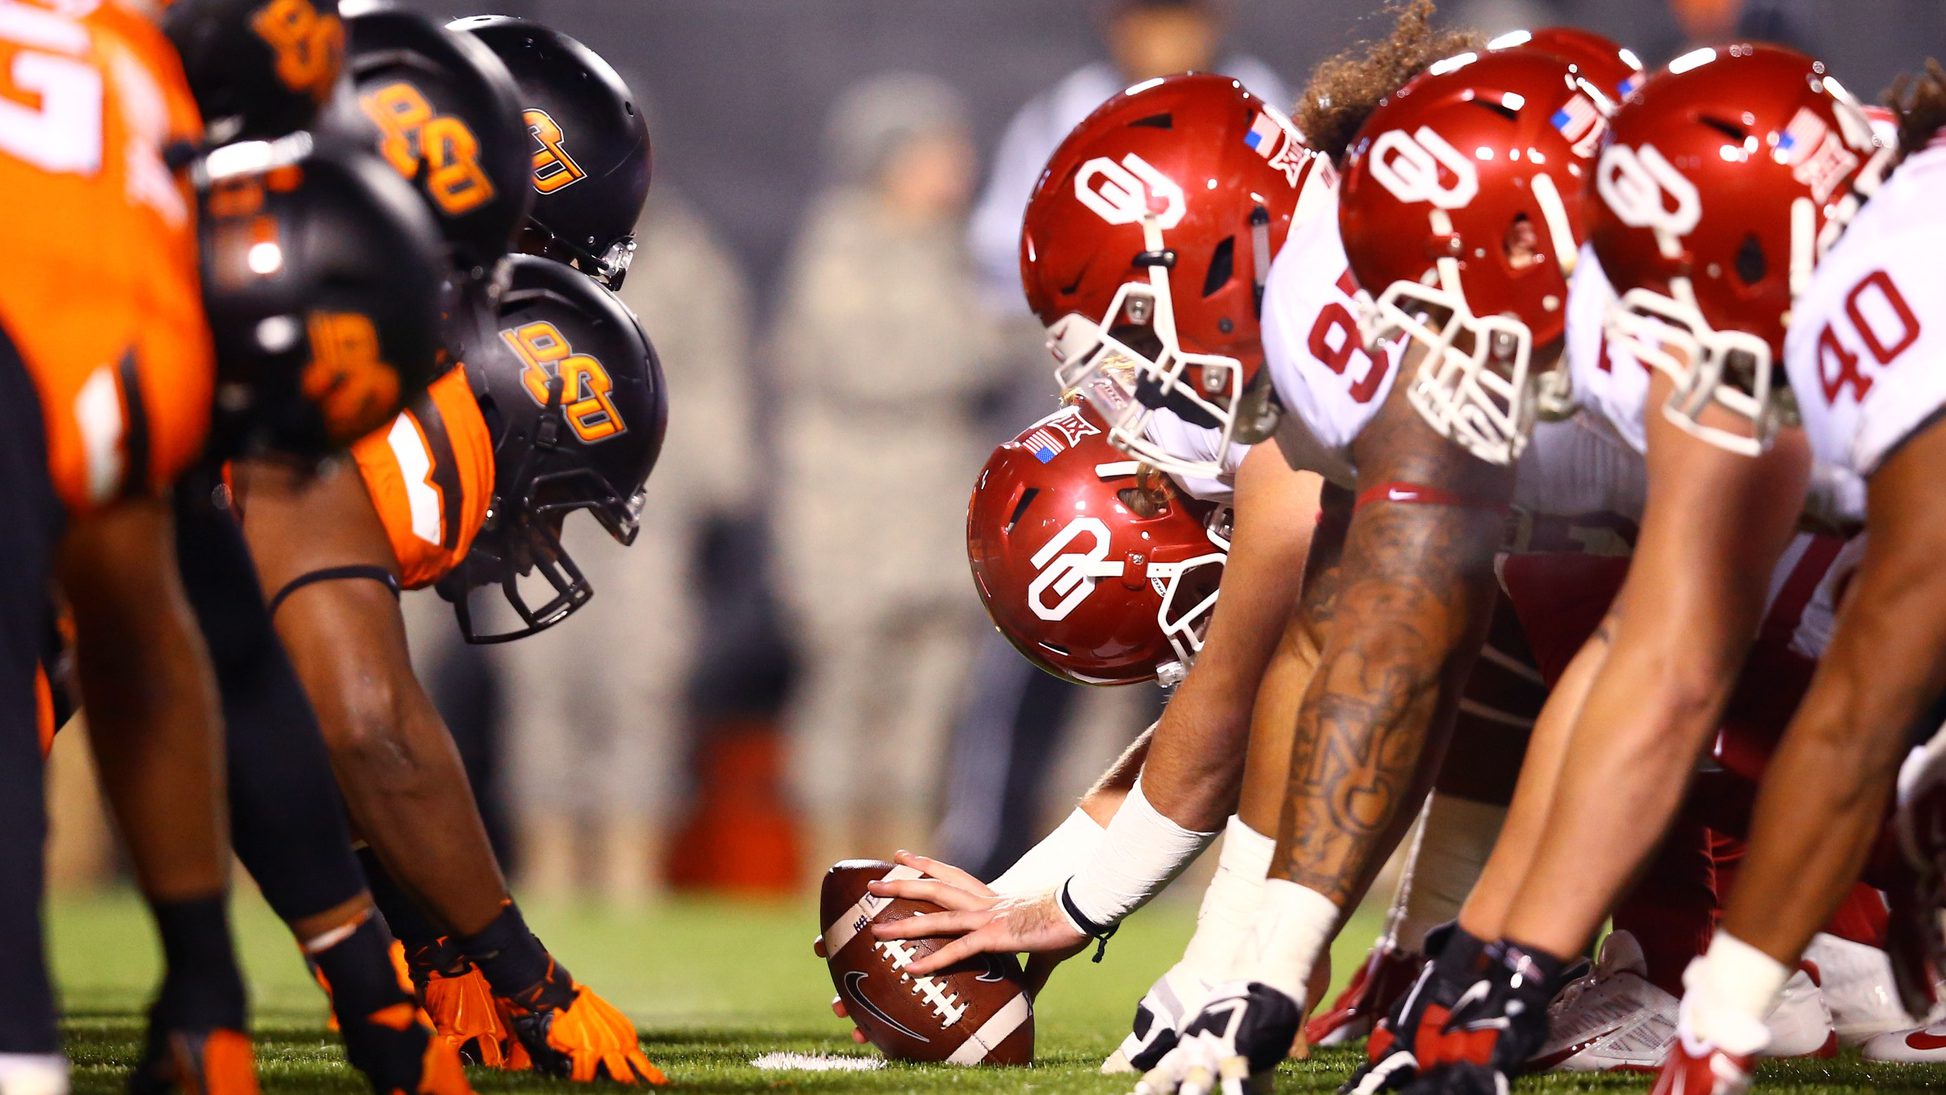 Bedlam In The Trenches: Oklahoma State's Defensive Line Matches Up Well With OU ...1946 x 1095